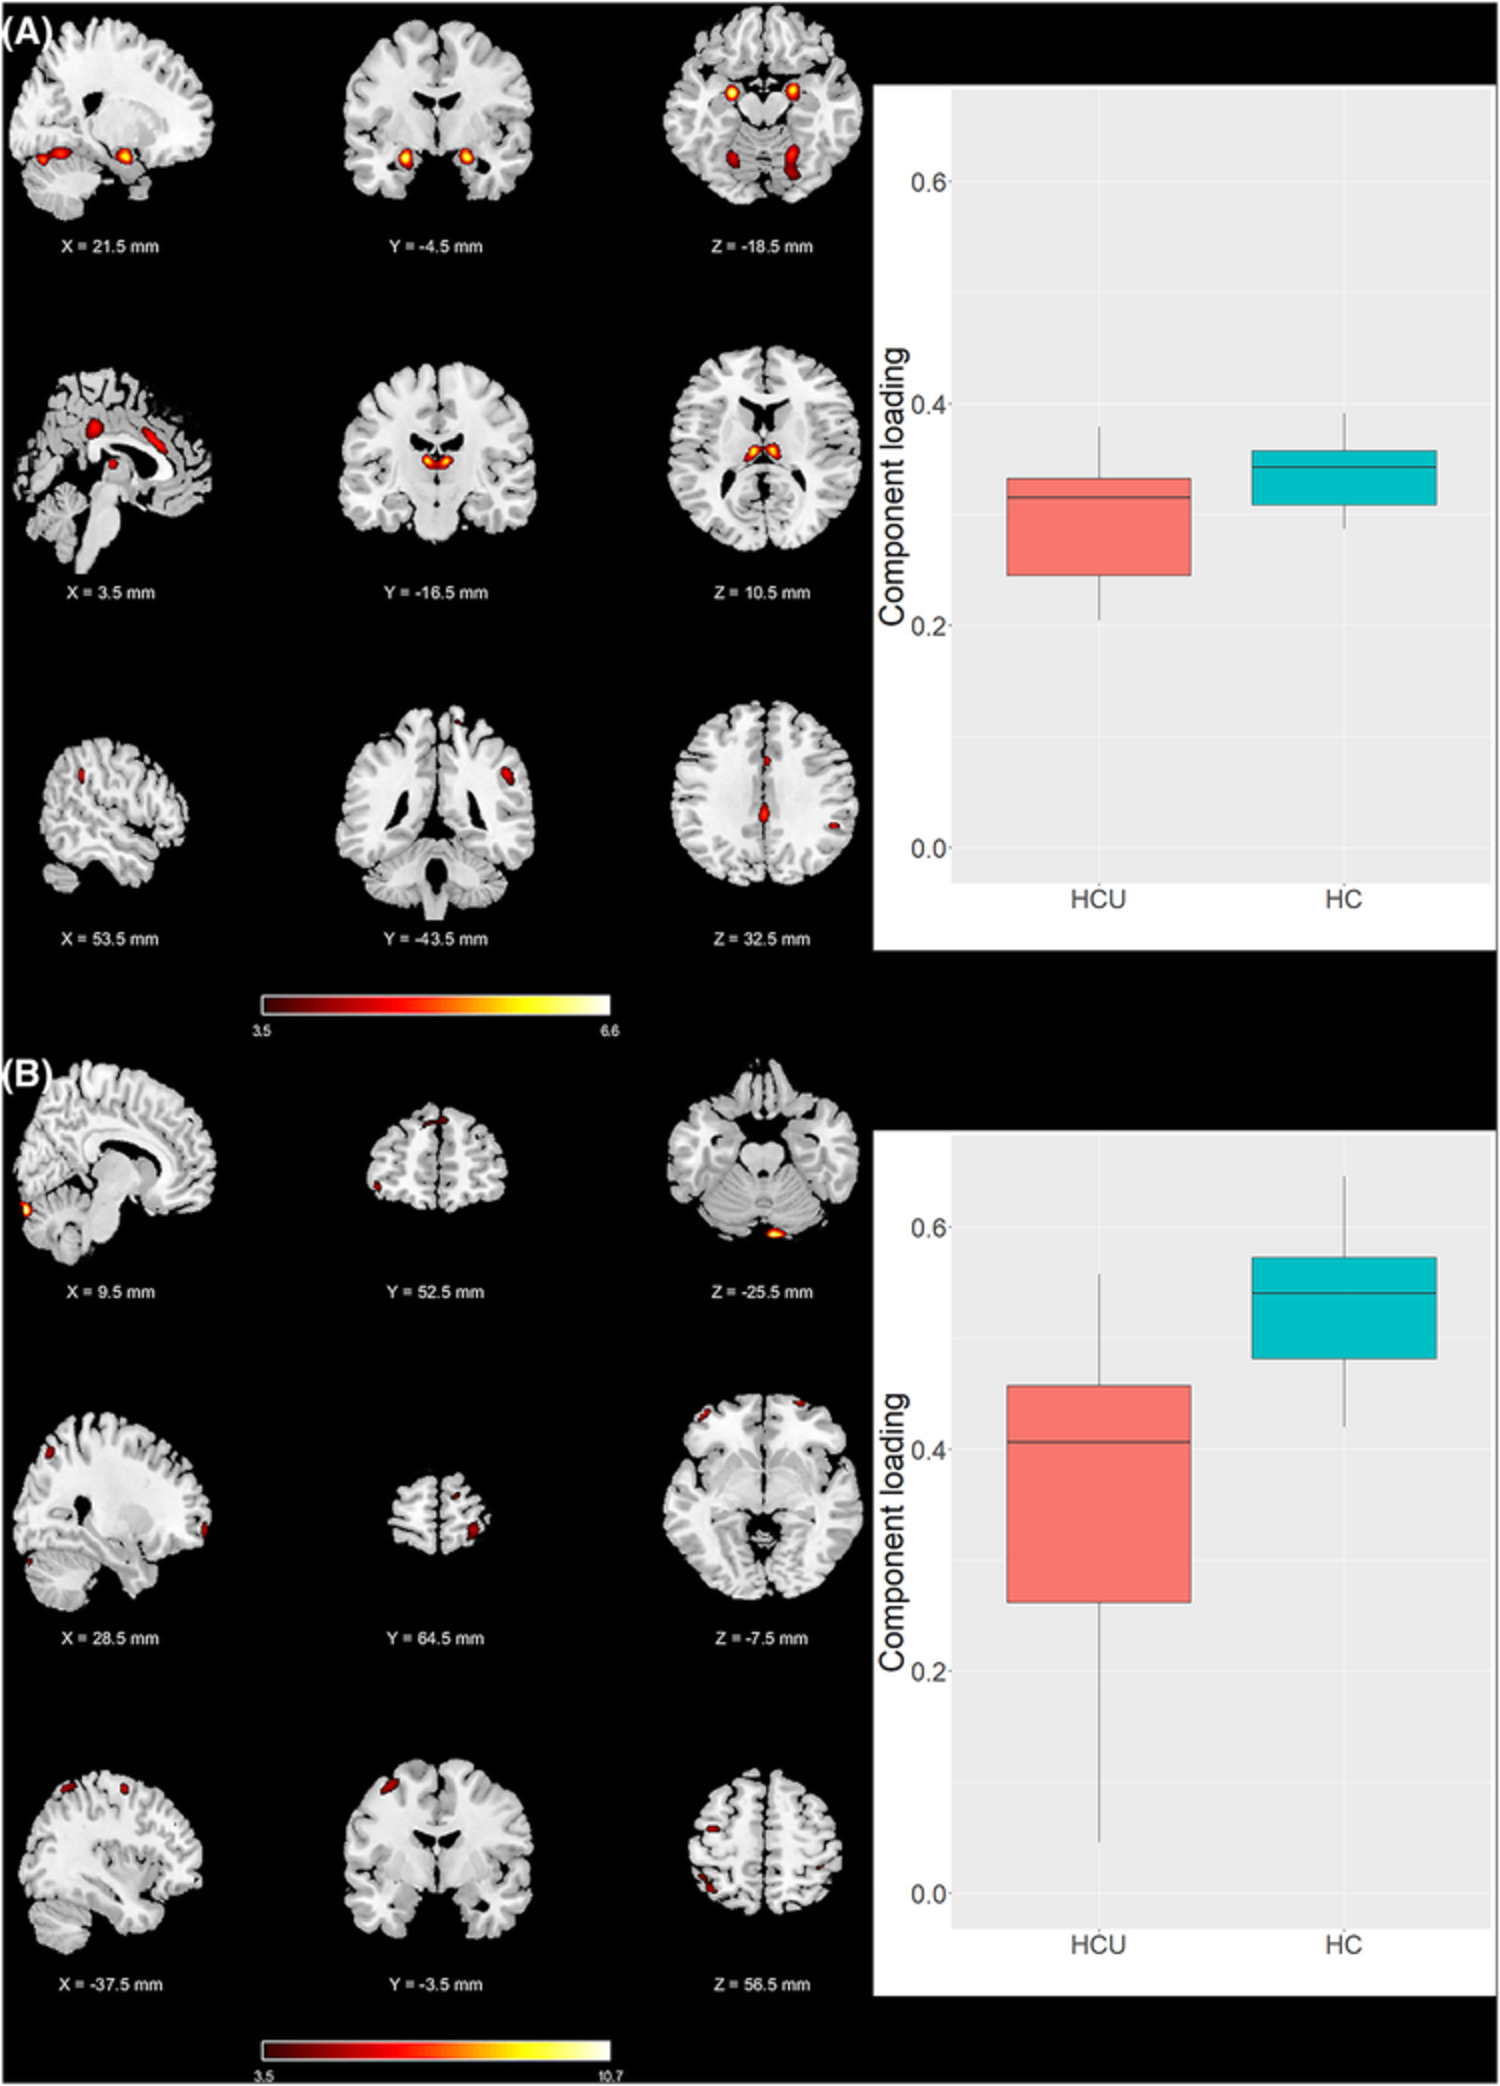 Multimodal MRI data fusion reveals distinct structural, functional and neurochemical correlates of heavy cannabis use